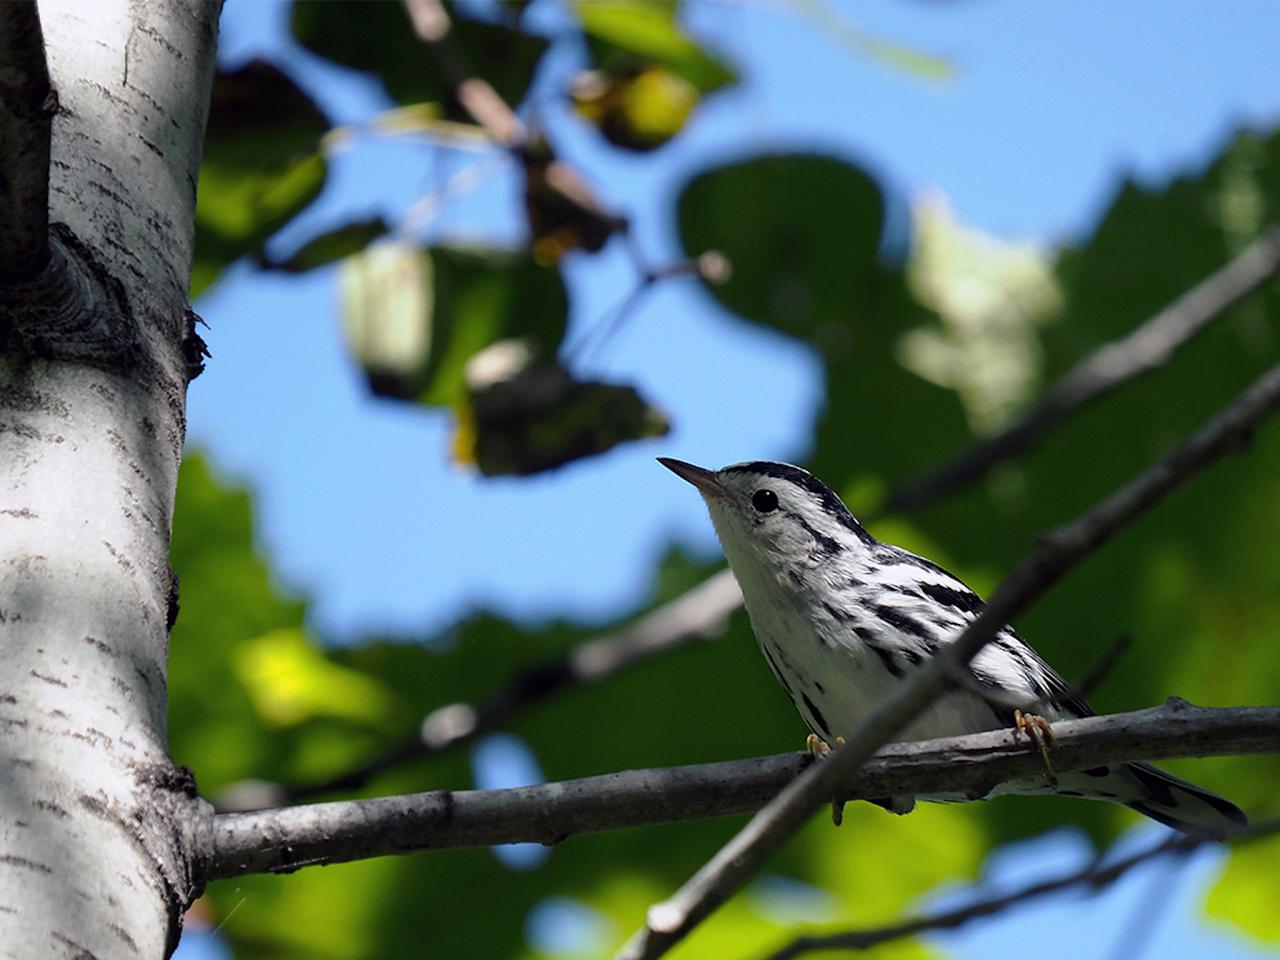 Black-and-white Warbler, New Hampshire, New Hampshire Nature Tour, New Hampshire Birding Tour, White Mountains, White Mountains Nature Tour, White Mountains Birding Tour, Mt. Washington, Naturalist Journeys